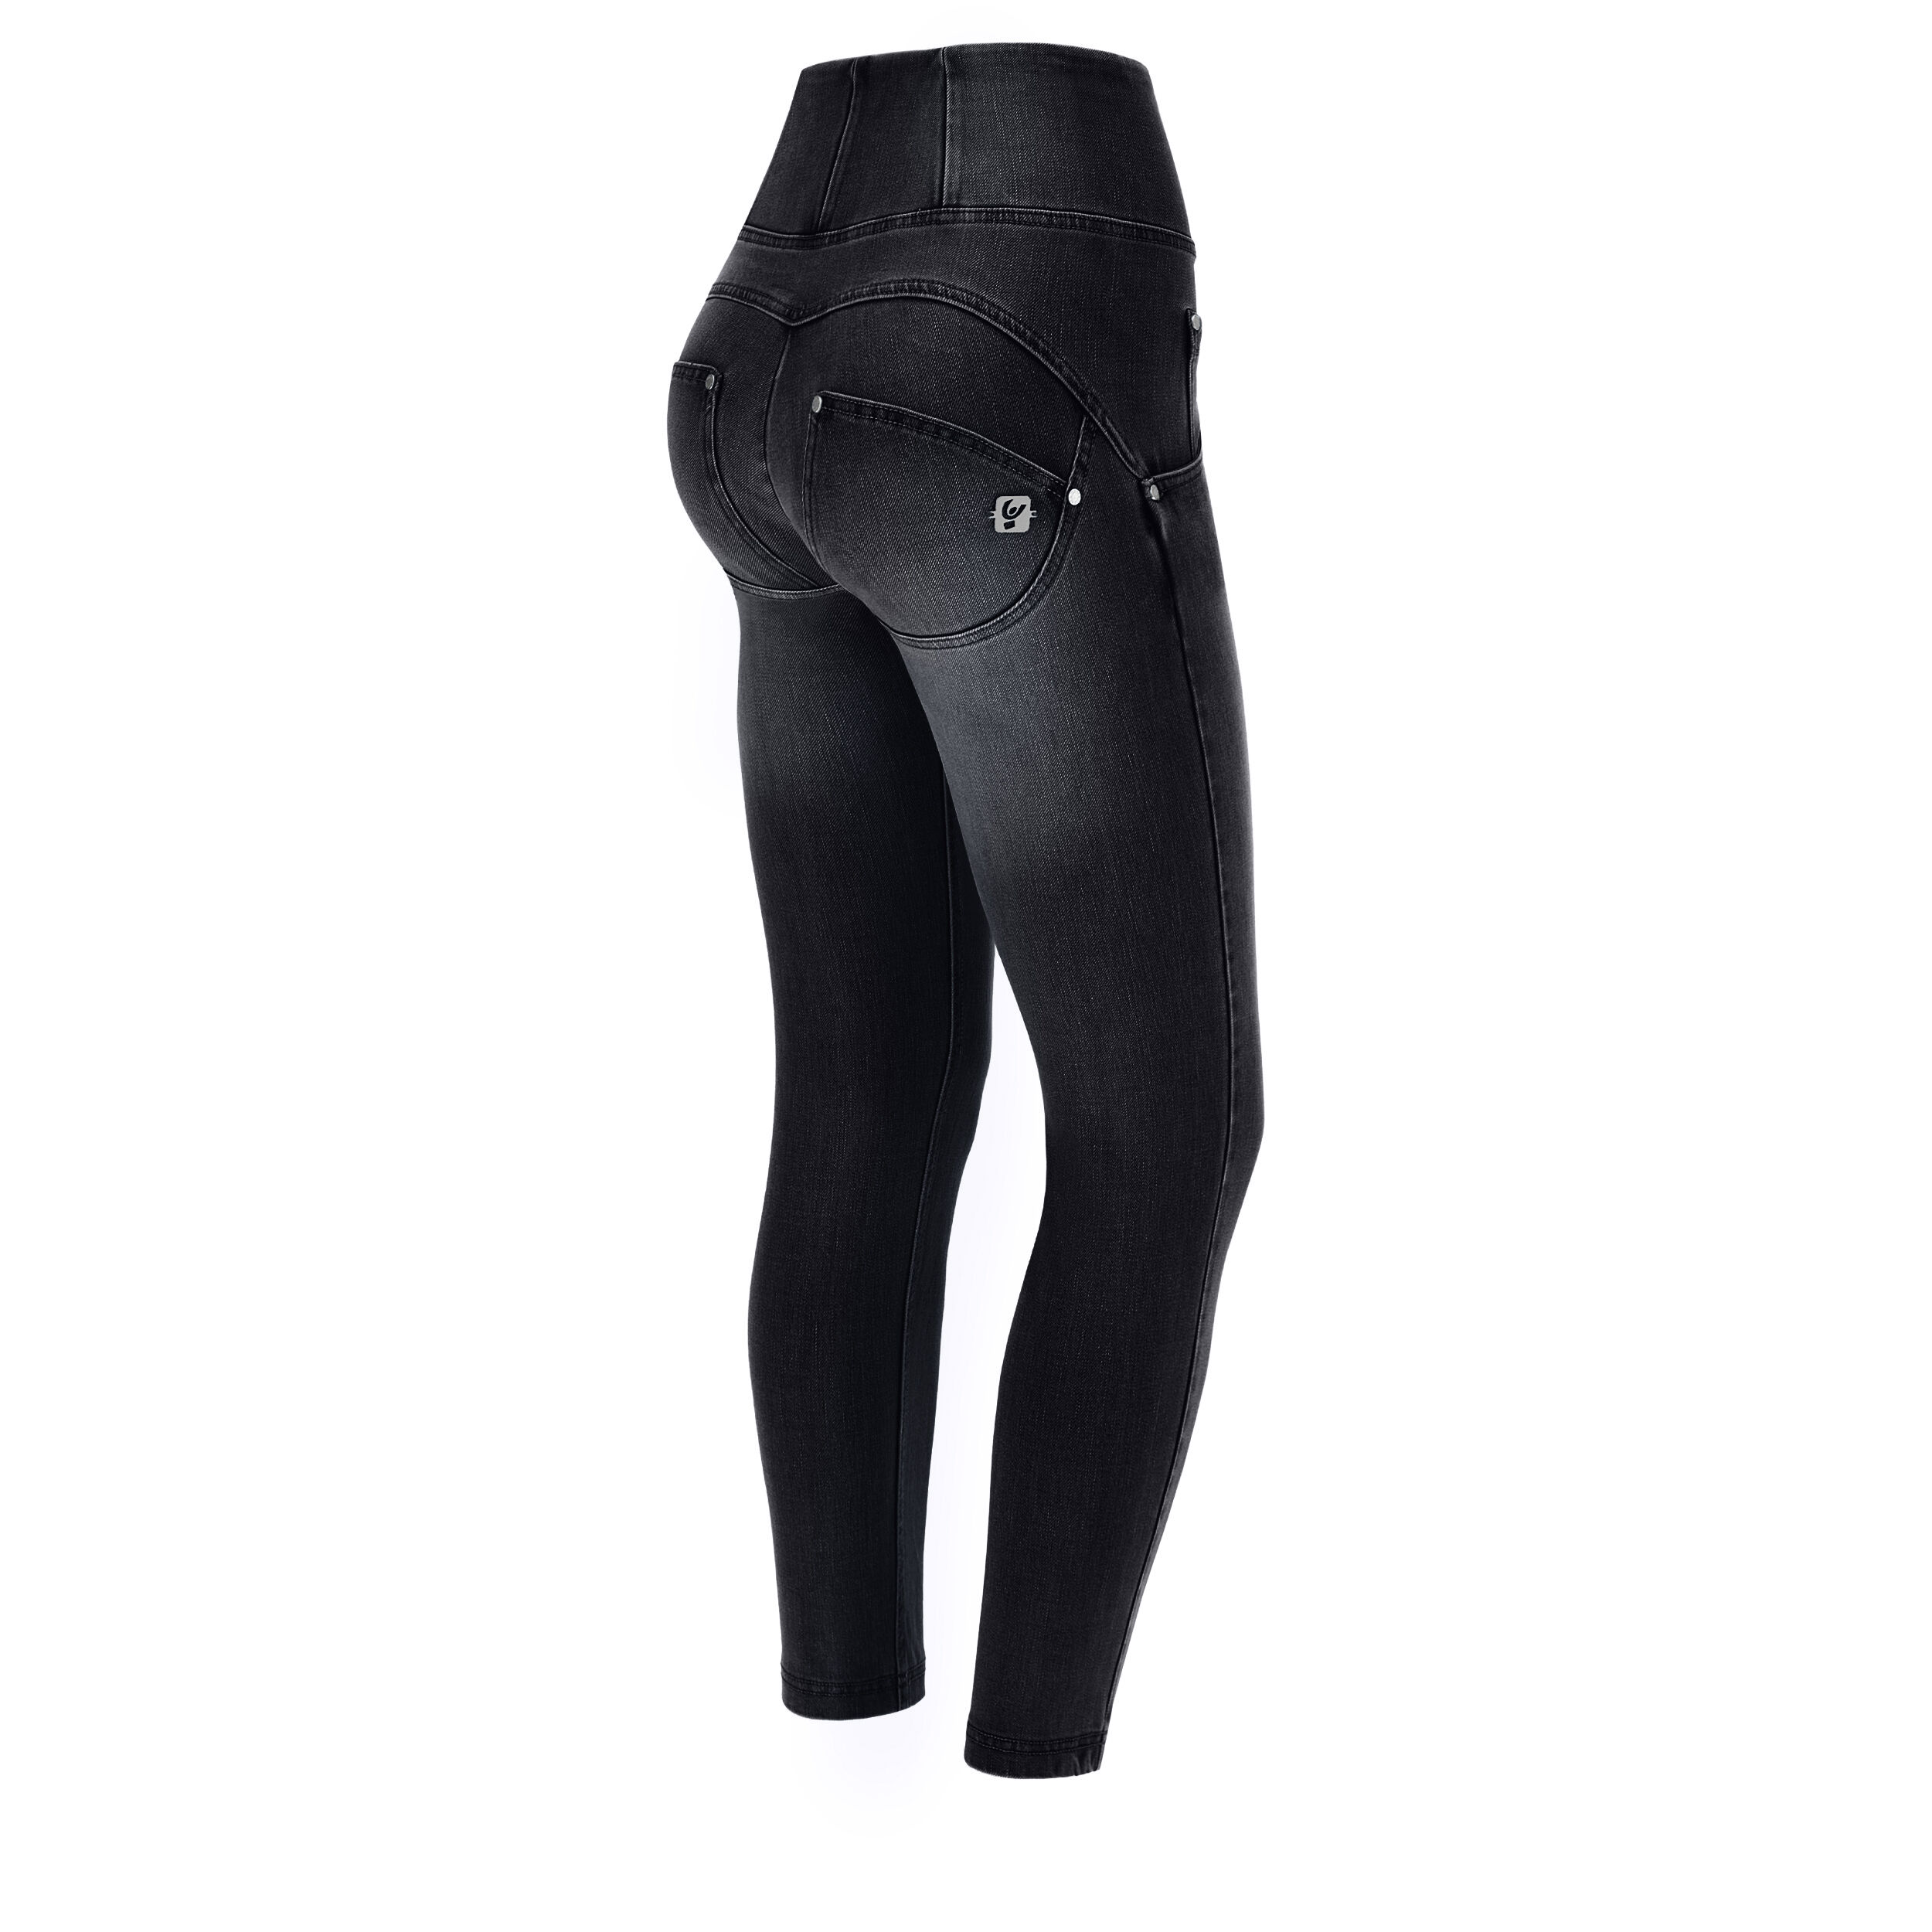 Freddy Jeans push up WR.UP® 7/8 superskinny effetto used vita alta Jeans Nero-Cuciture In Tono Donna Medium